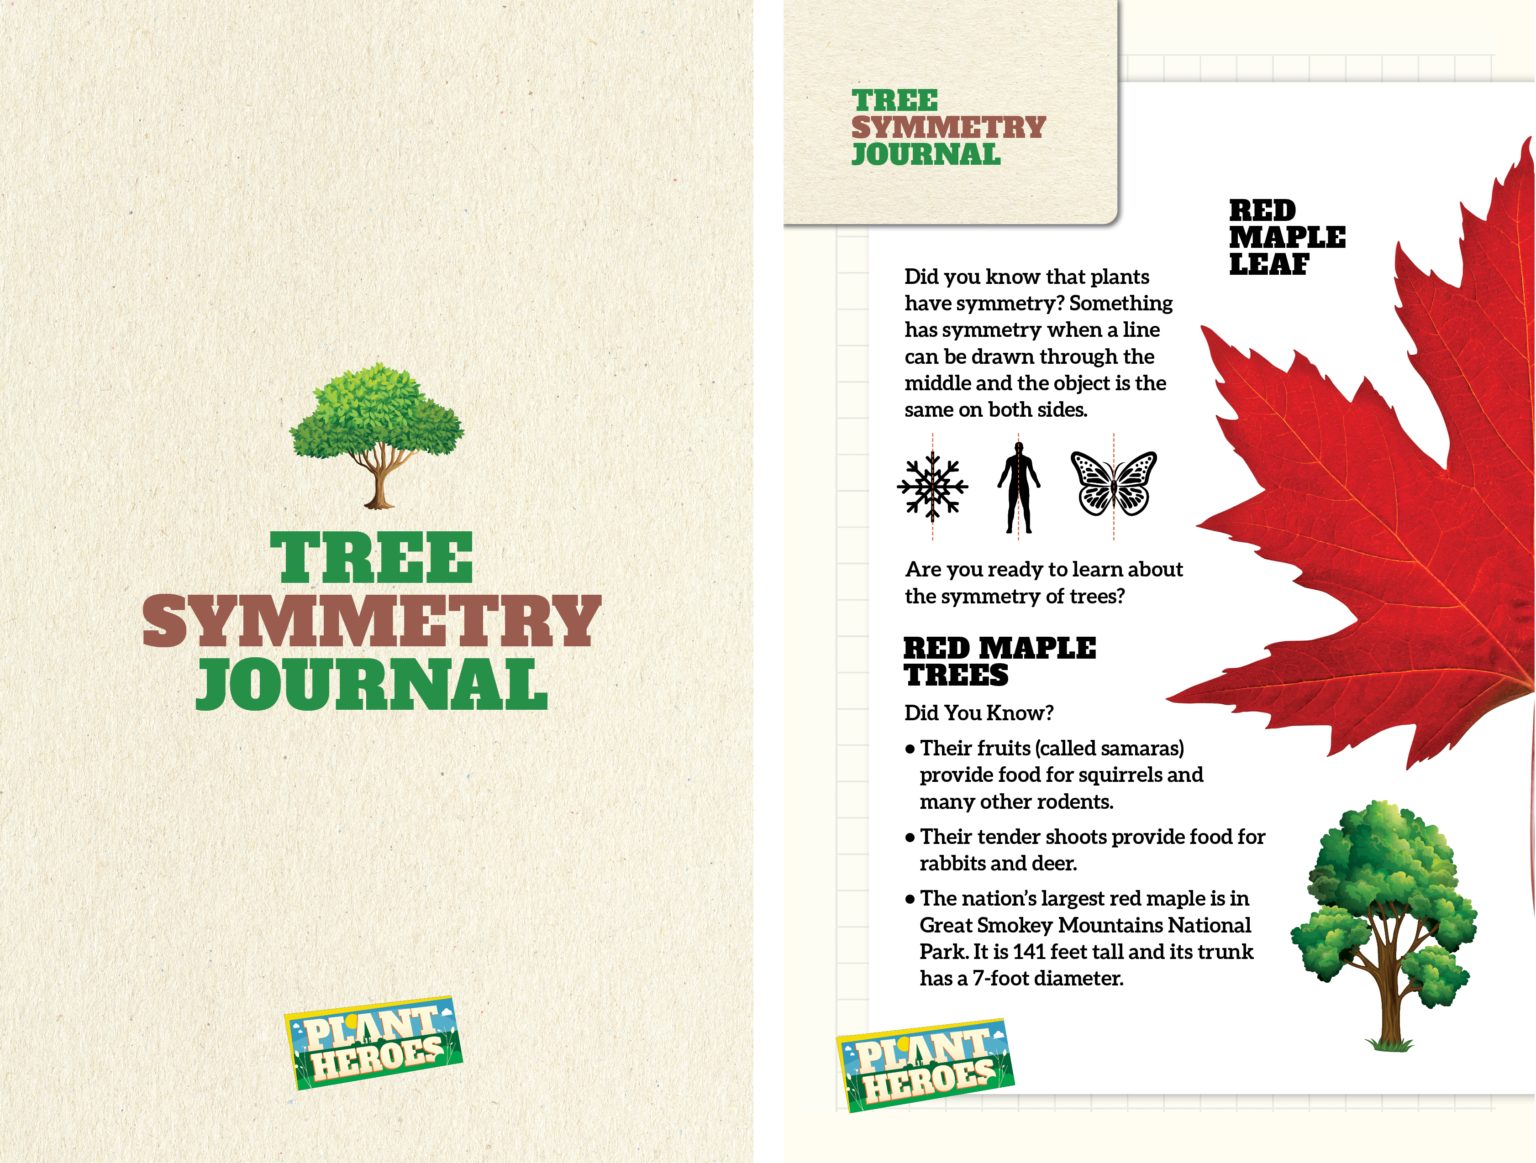 pages 1 and 2 of the tree symmetry journal